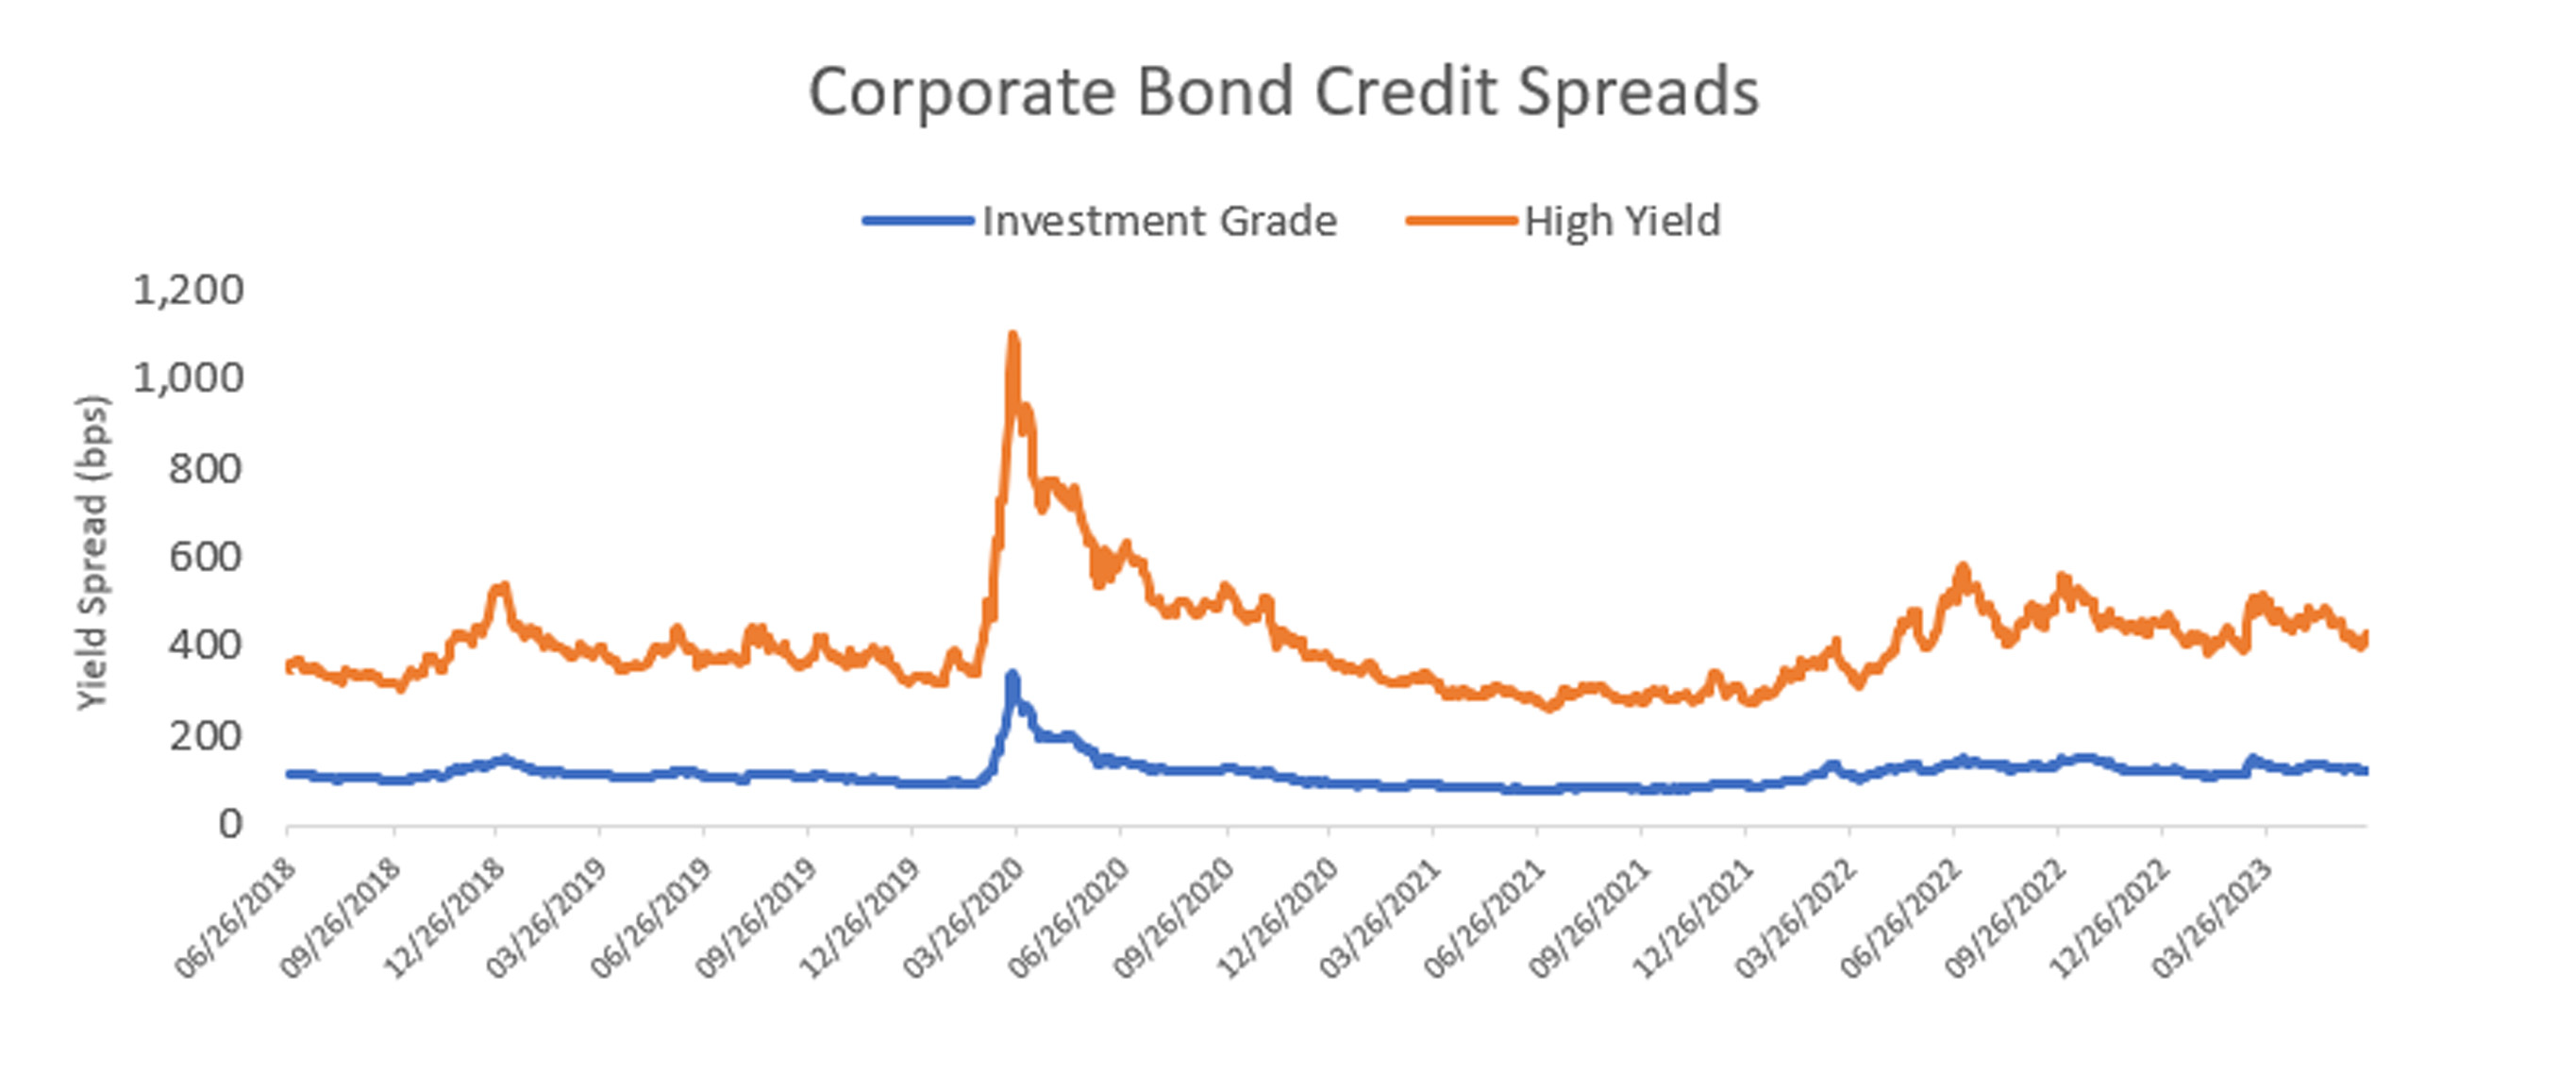 A line chart of Corporate Bond Credit Spreads